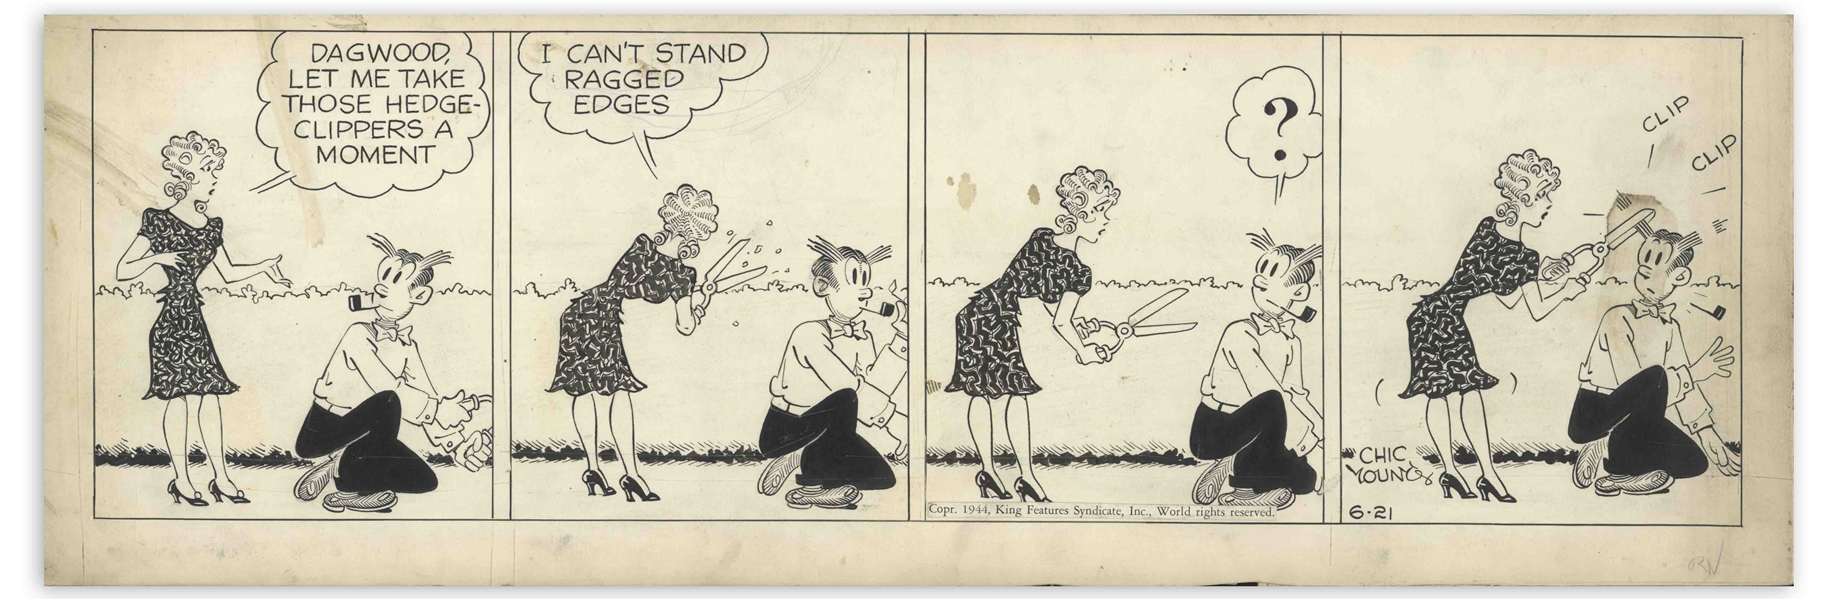 Chic Young Hand-Drawn ''Blondie'' Comic Strip From 1944 Titled ''The Barber's Itch'' -- Dagwood Gets a Haircut